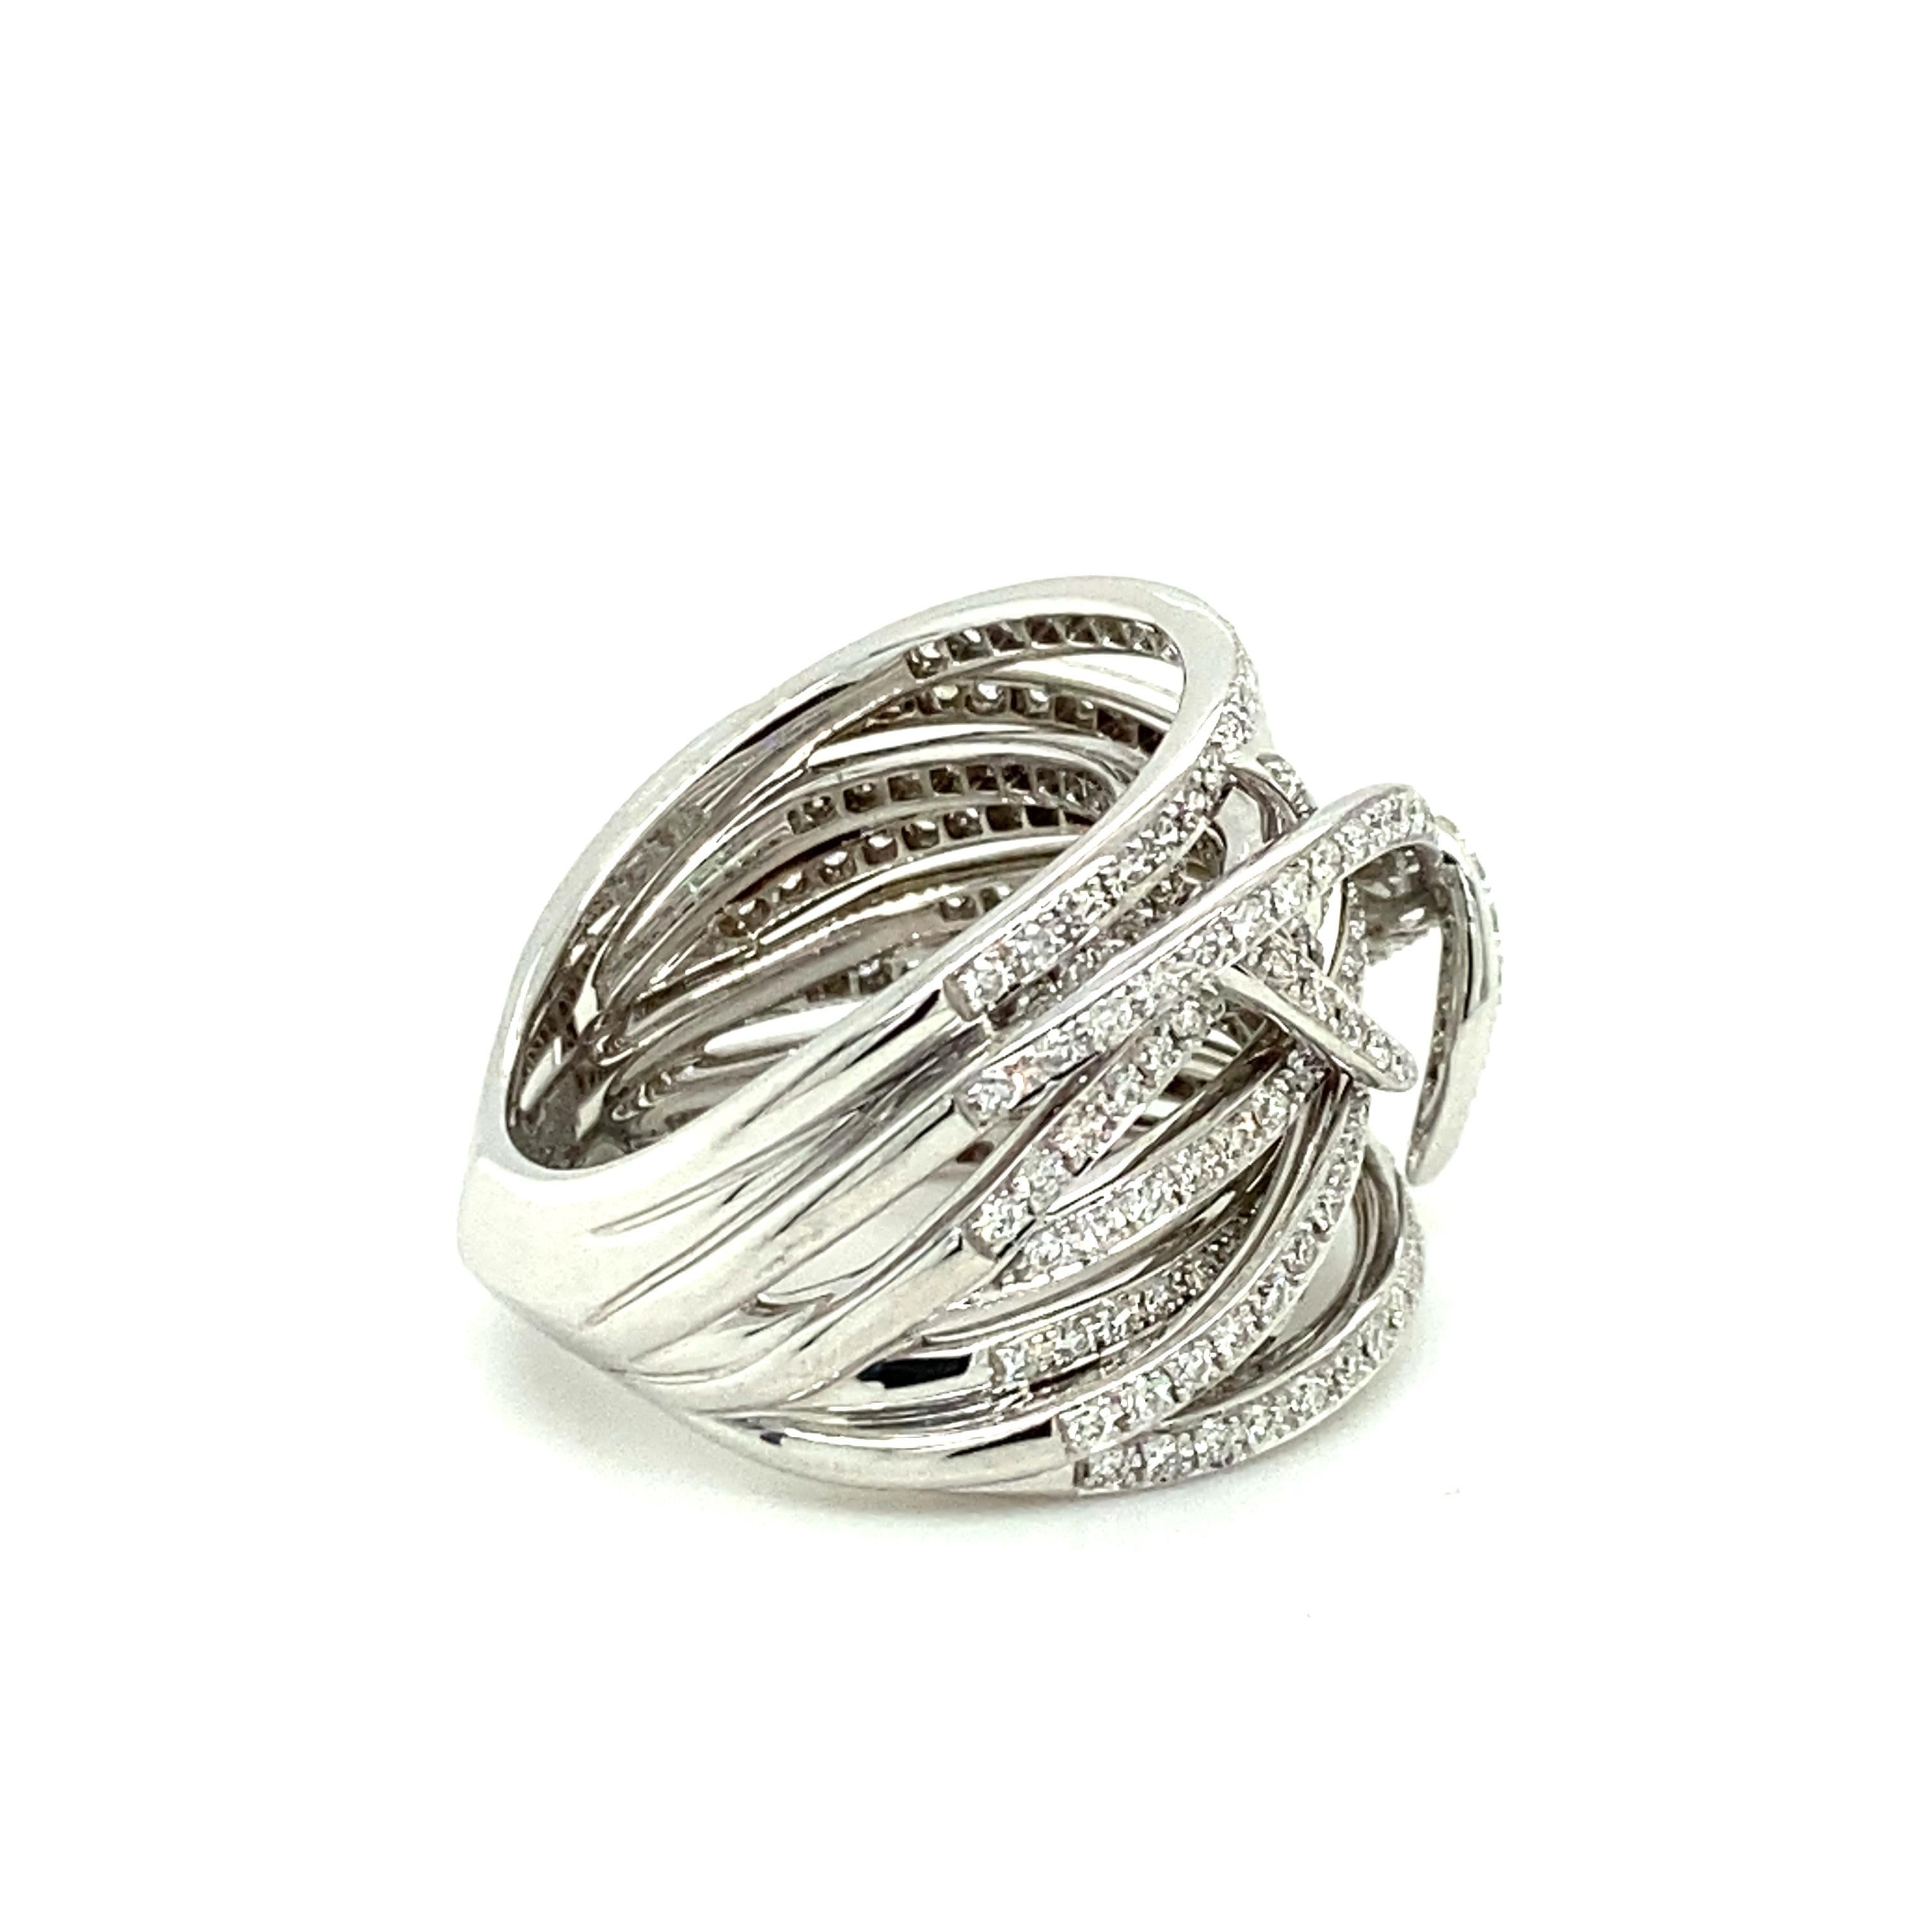 Brilliant Cut Stephen Webster Thorn Bandeau Ring with Diamonds in 18 Karat White Gold